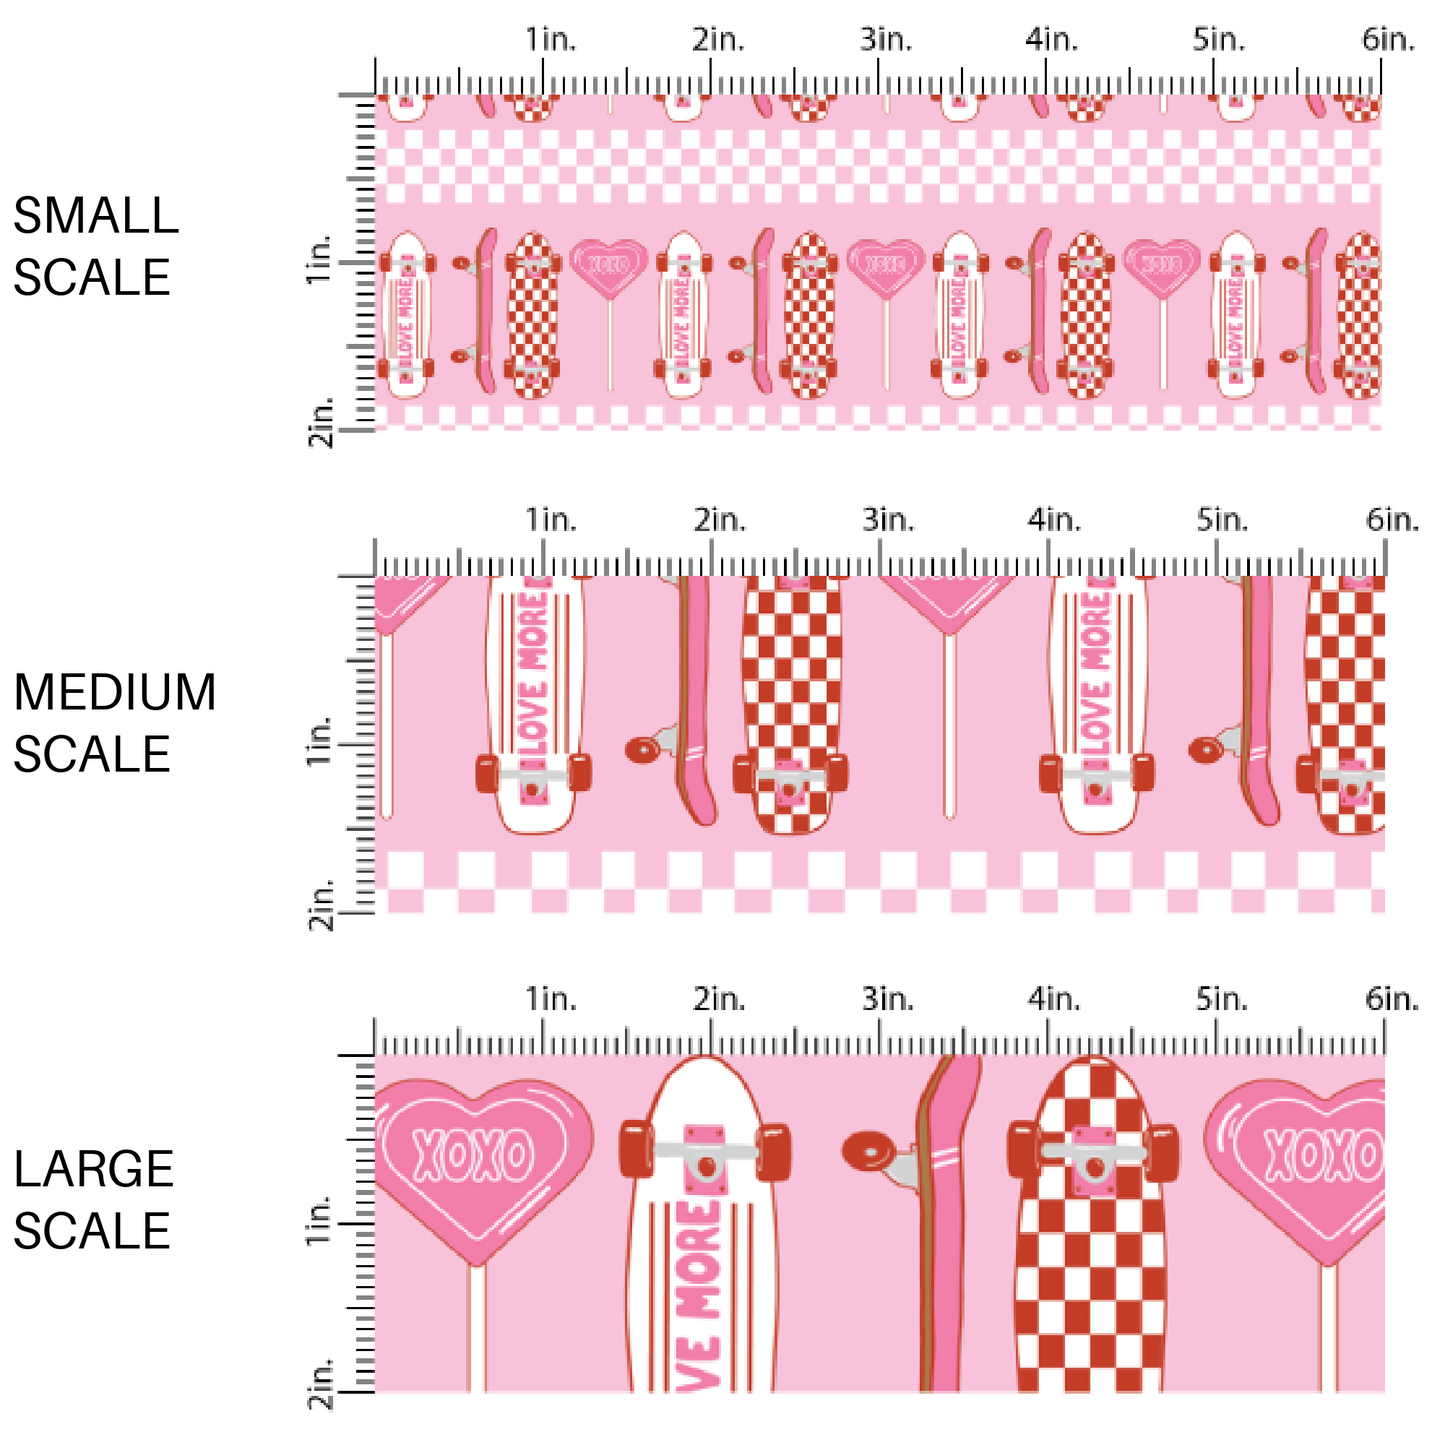 Pink fabric image guide with white skateboards and checkered skateboards with pink lollipops